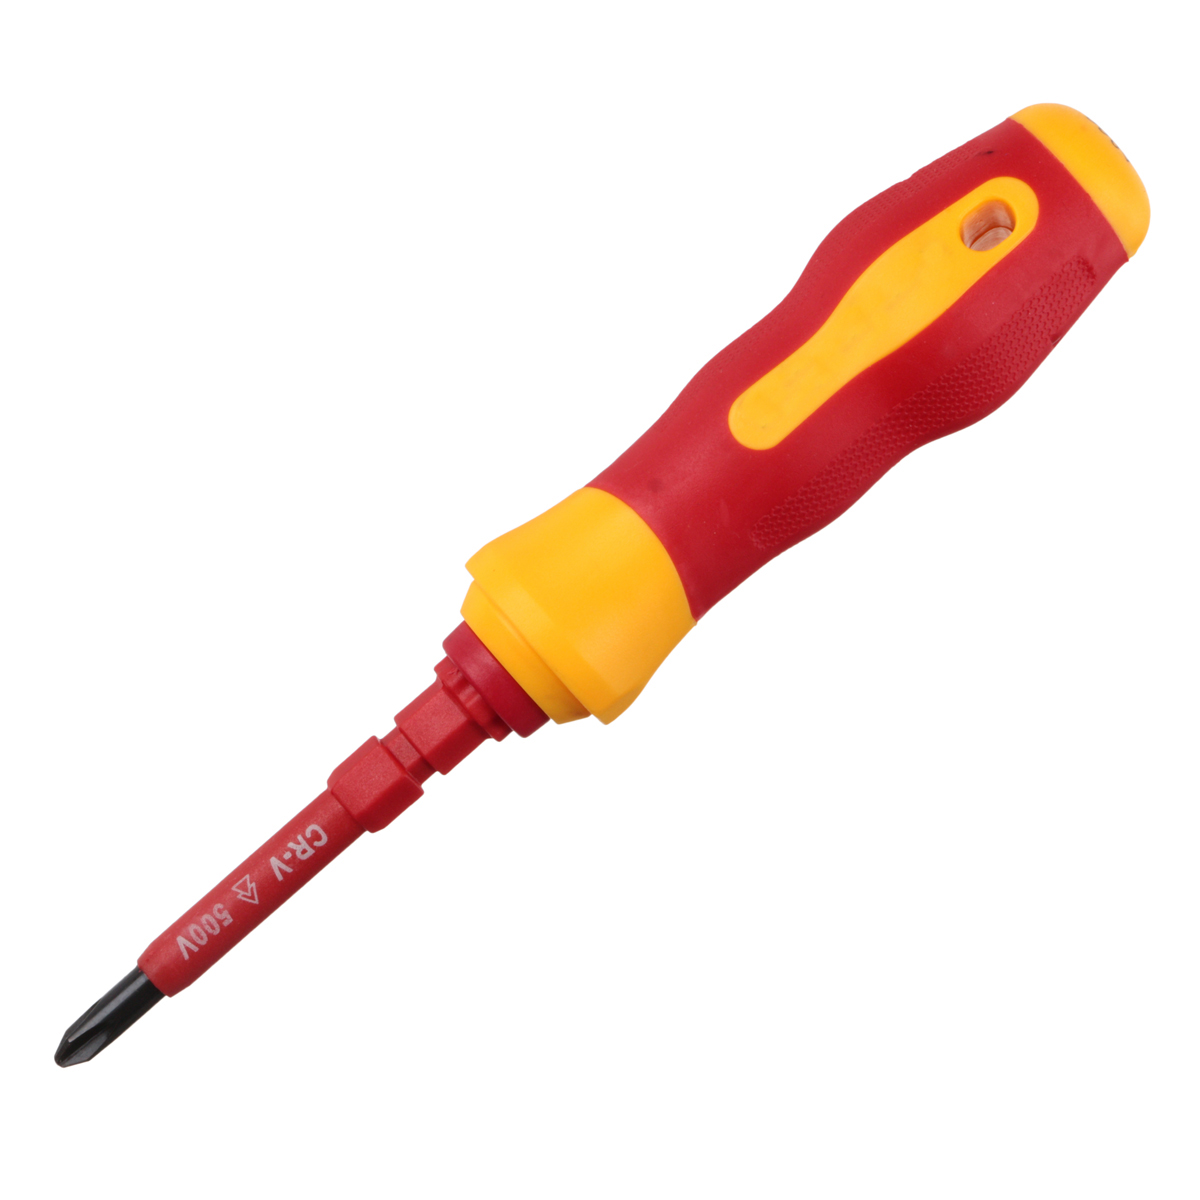 Raitooltrade-HT01-7pcs-Electronic-Insulated-Hand-Screwdriver-Tools-Accessory-Set-1045867-3